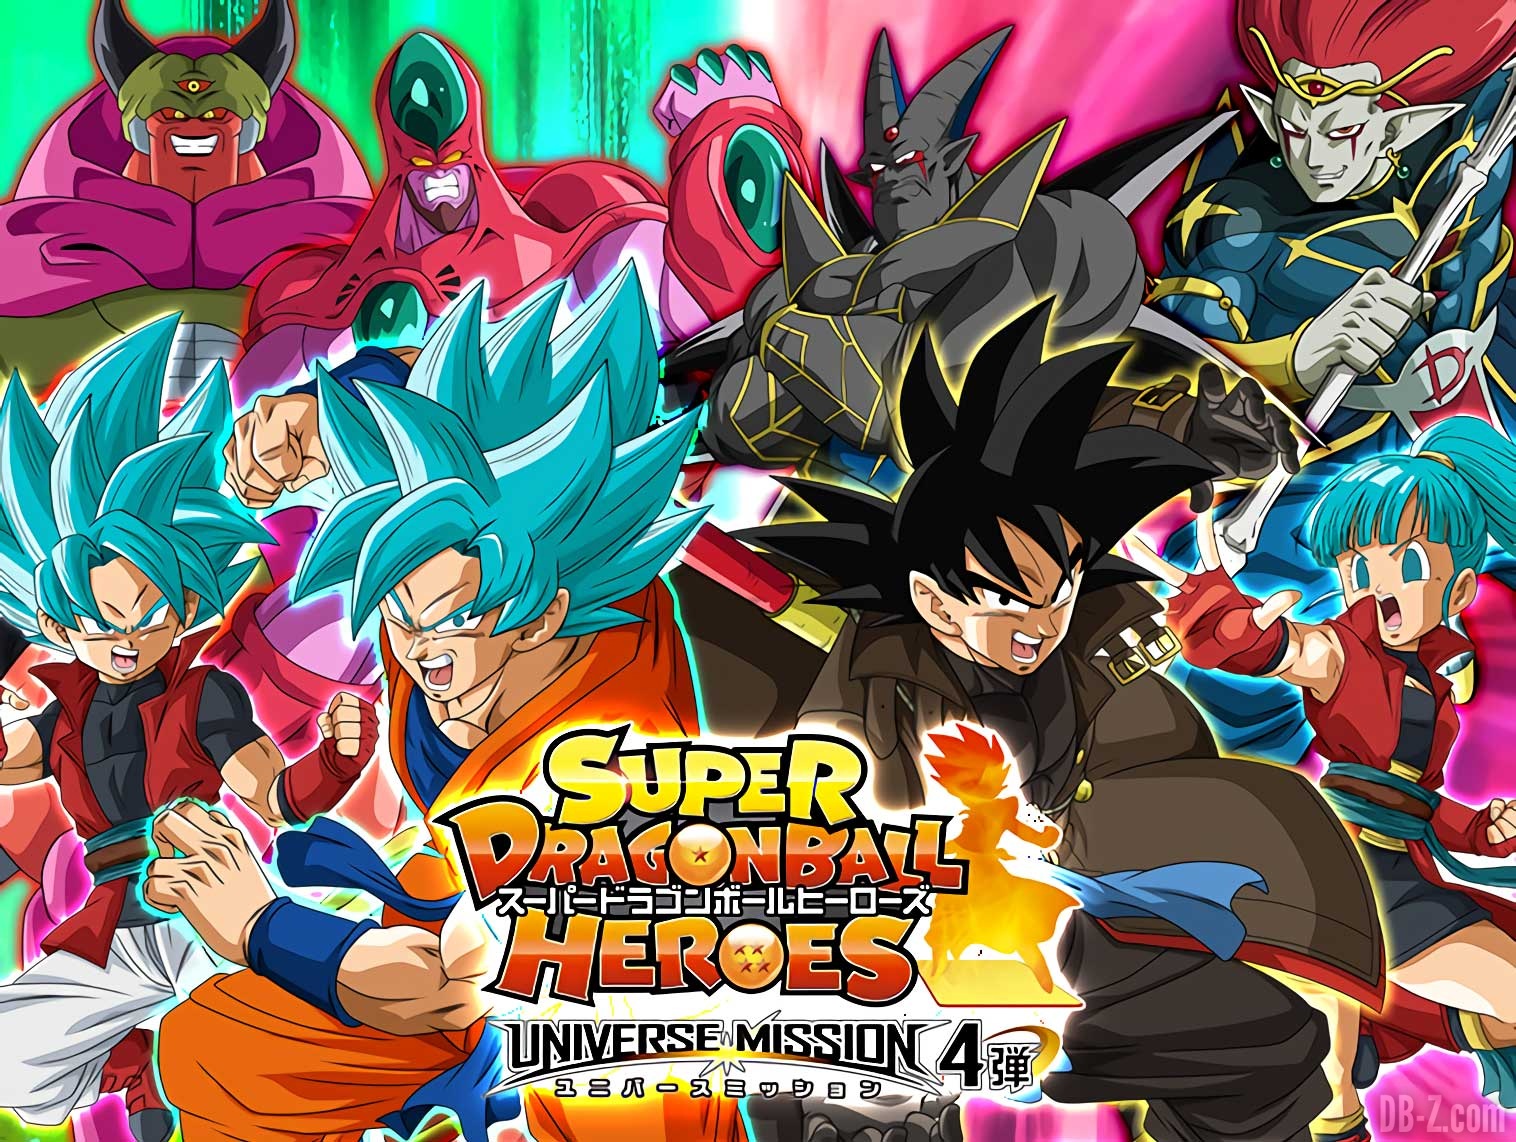 Super Dragon Ball Heroes Universe Mission 4 (UVM4) : OPENING